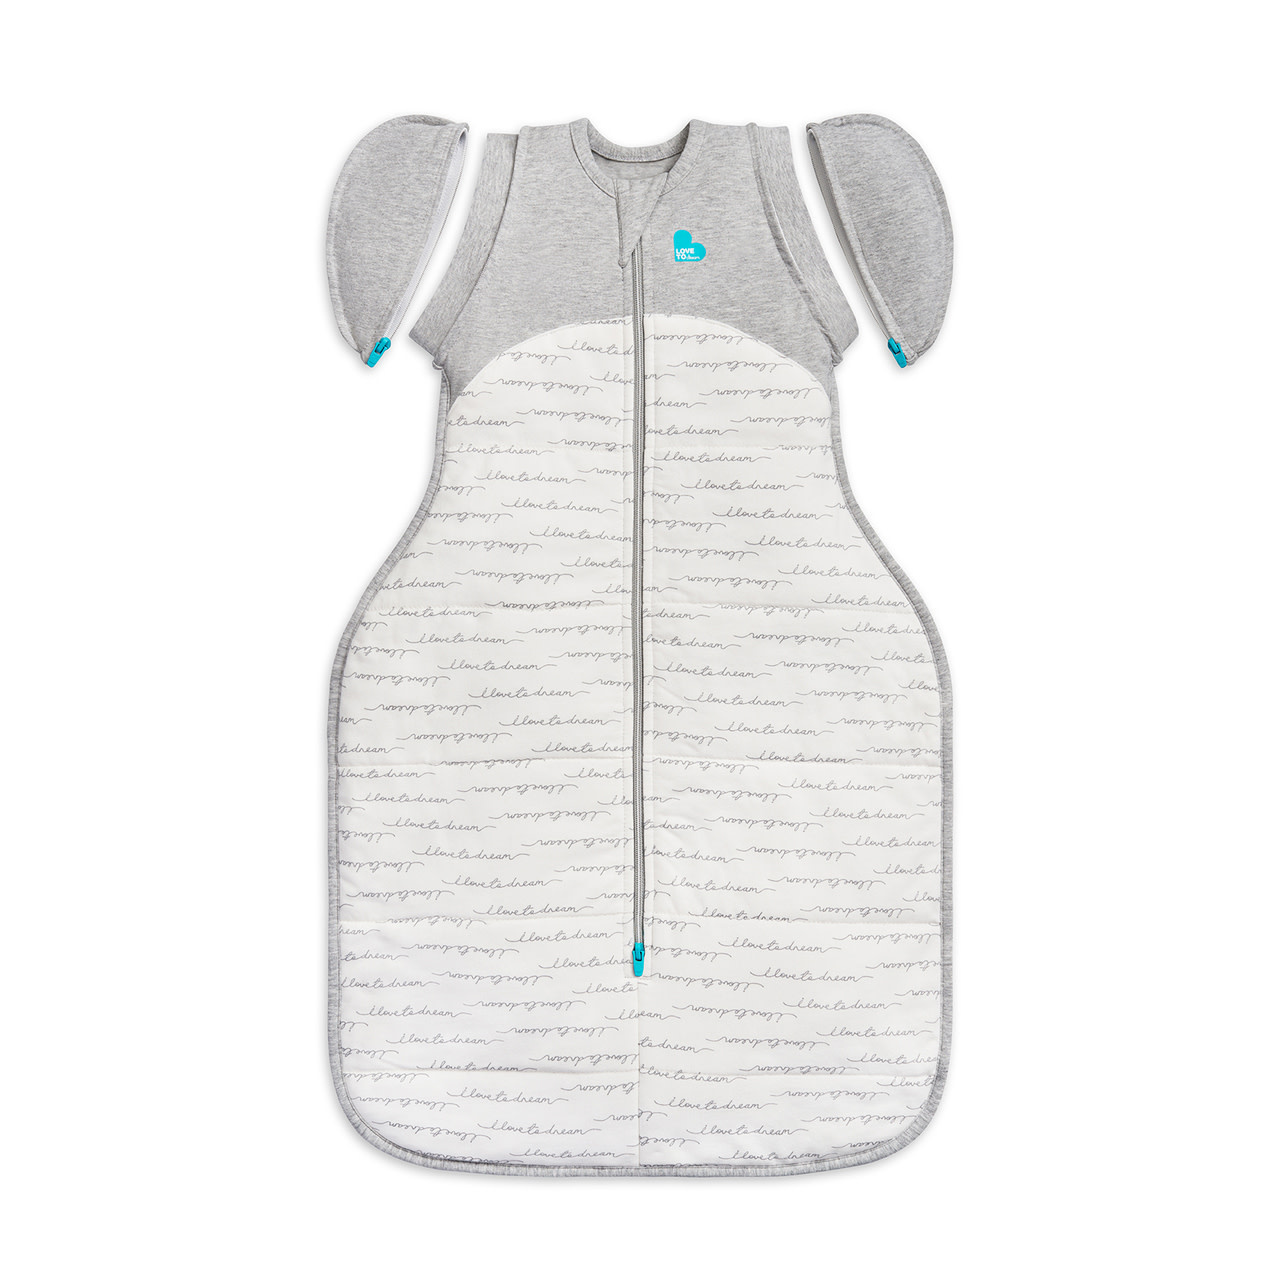 Love To Dream Love To Dream Swaddle Up™ Transition Bag Warm 2.5 Tog - White - Dreamer